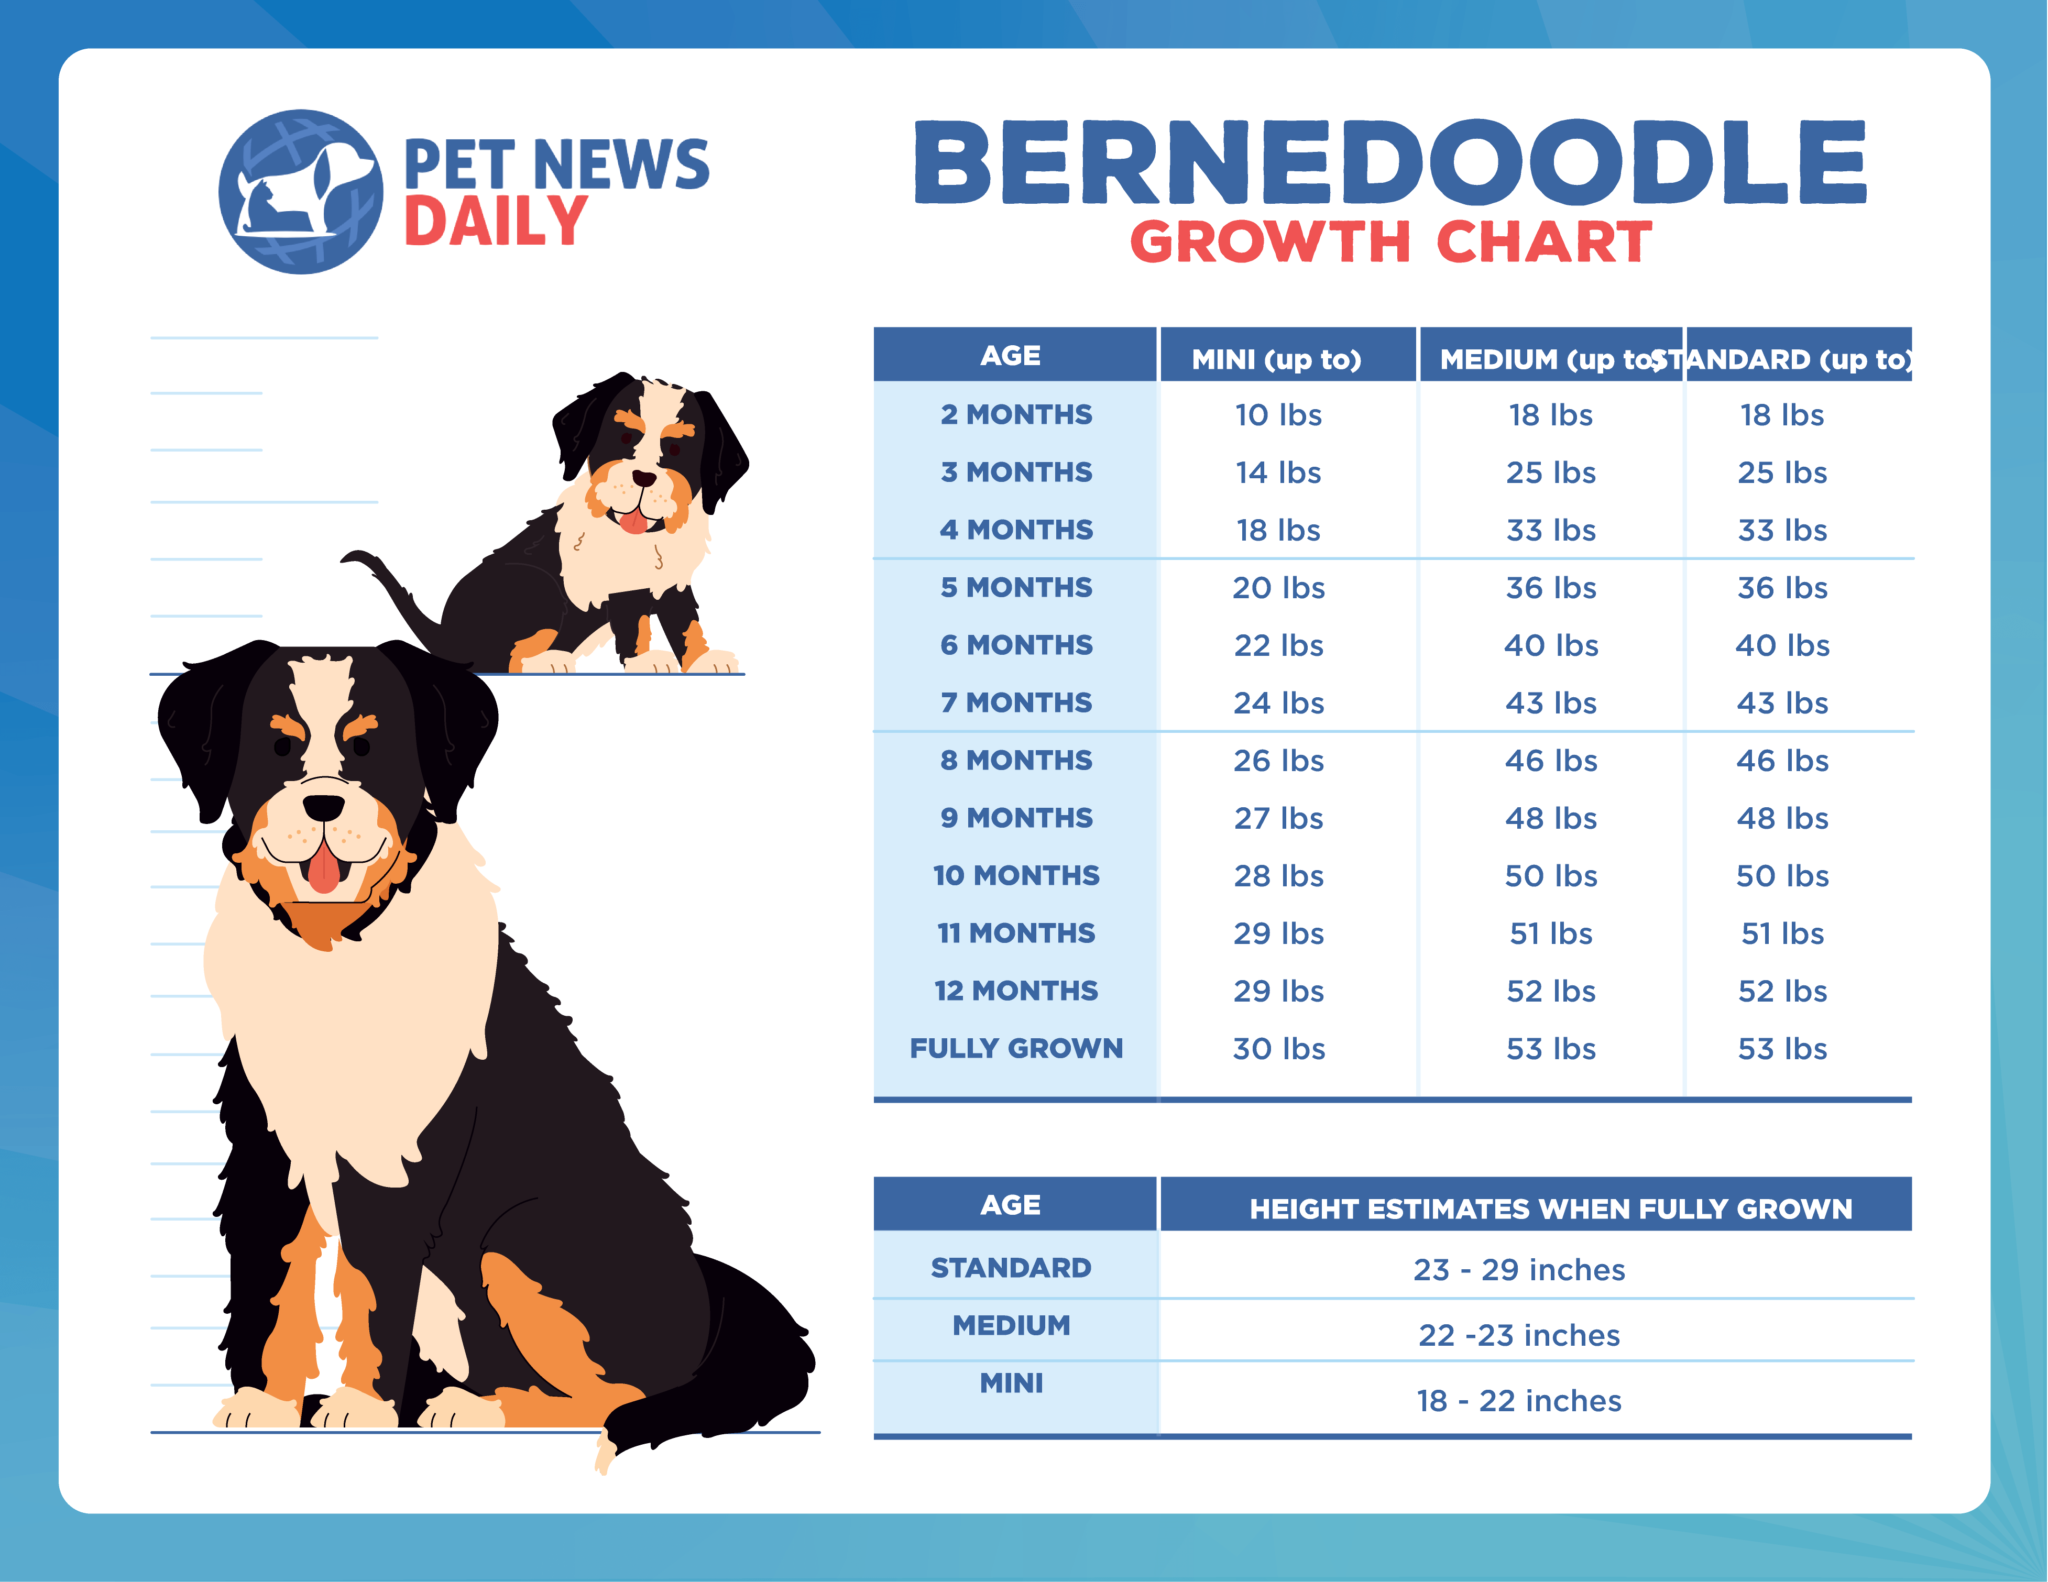 Bernedoodle Growth Chart How Big Will Your Bernedoodle Get? Pet News